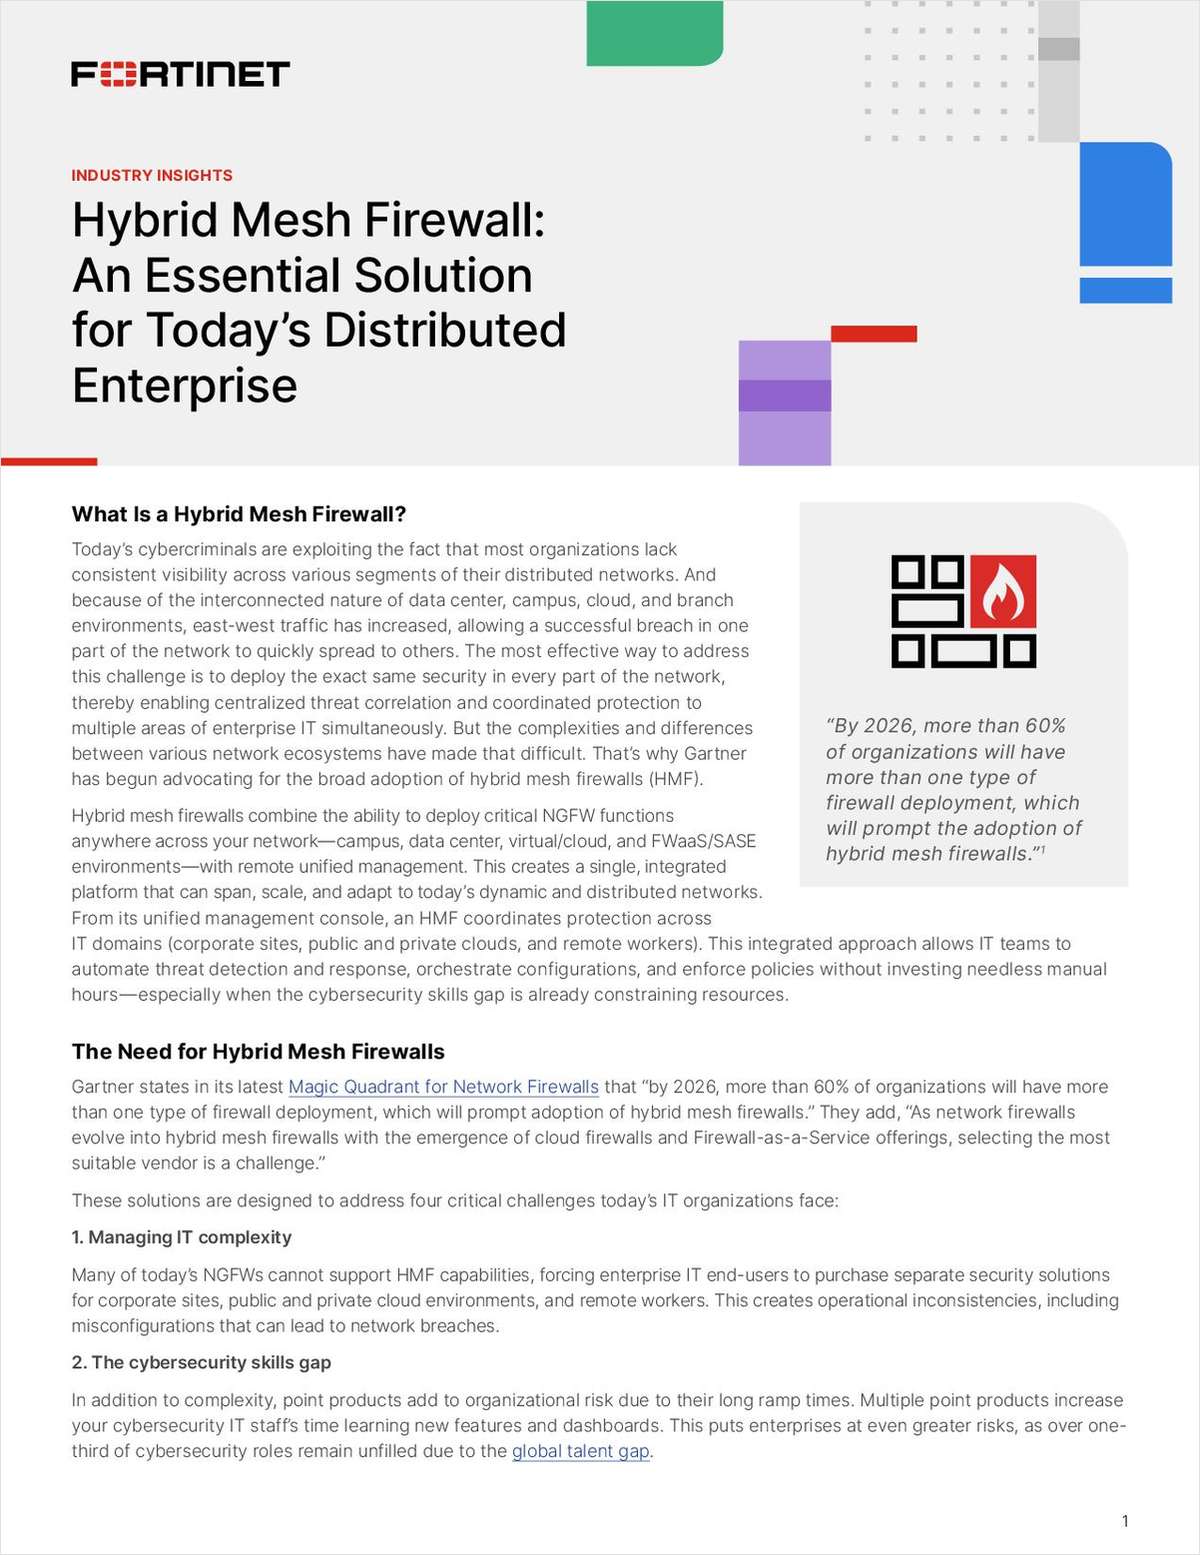 Hybrid Mesh Firewall: An Essential Solution for Today's Distributed Enterprise